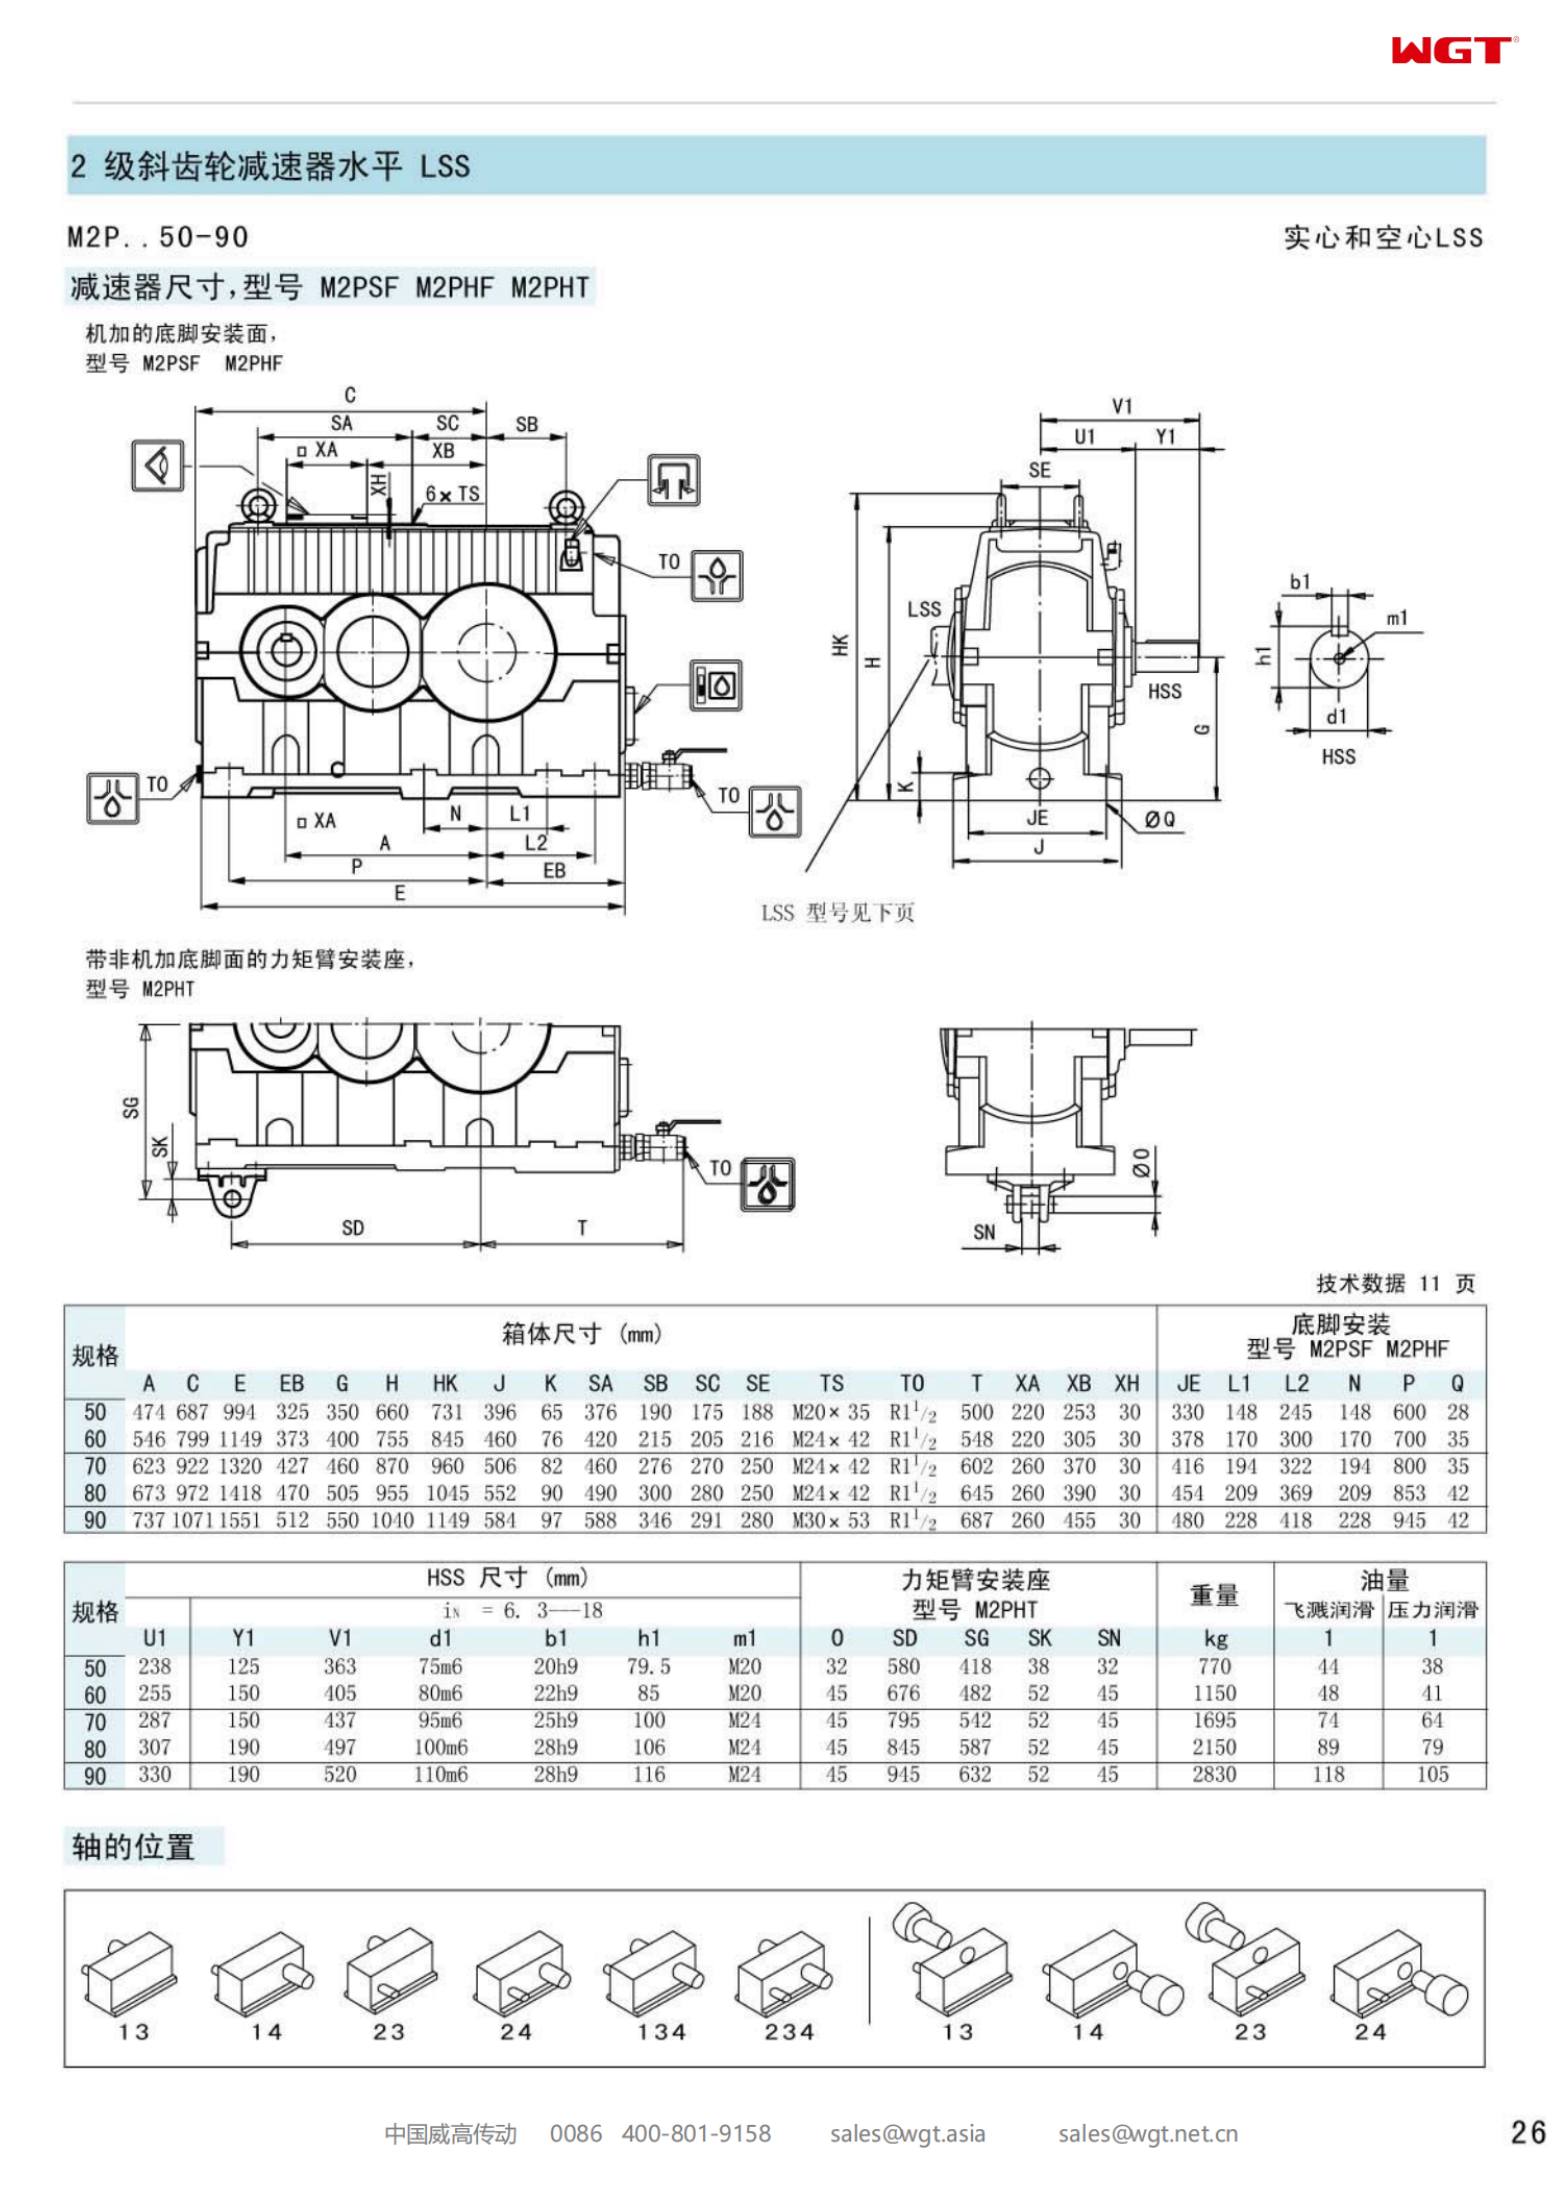 M2PHT50 Replace_SEW_M_Series Gearbox